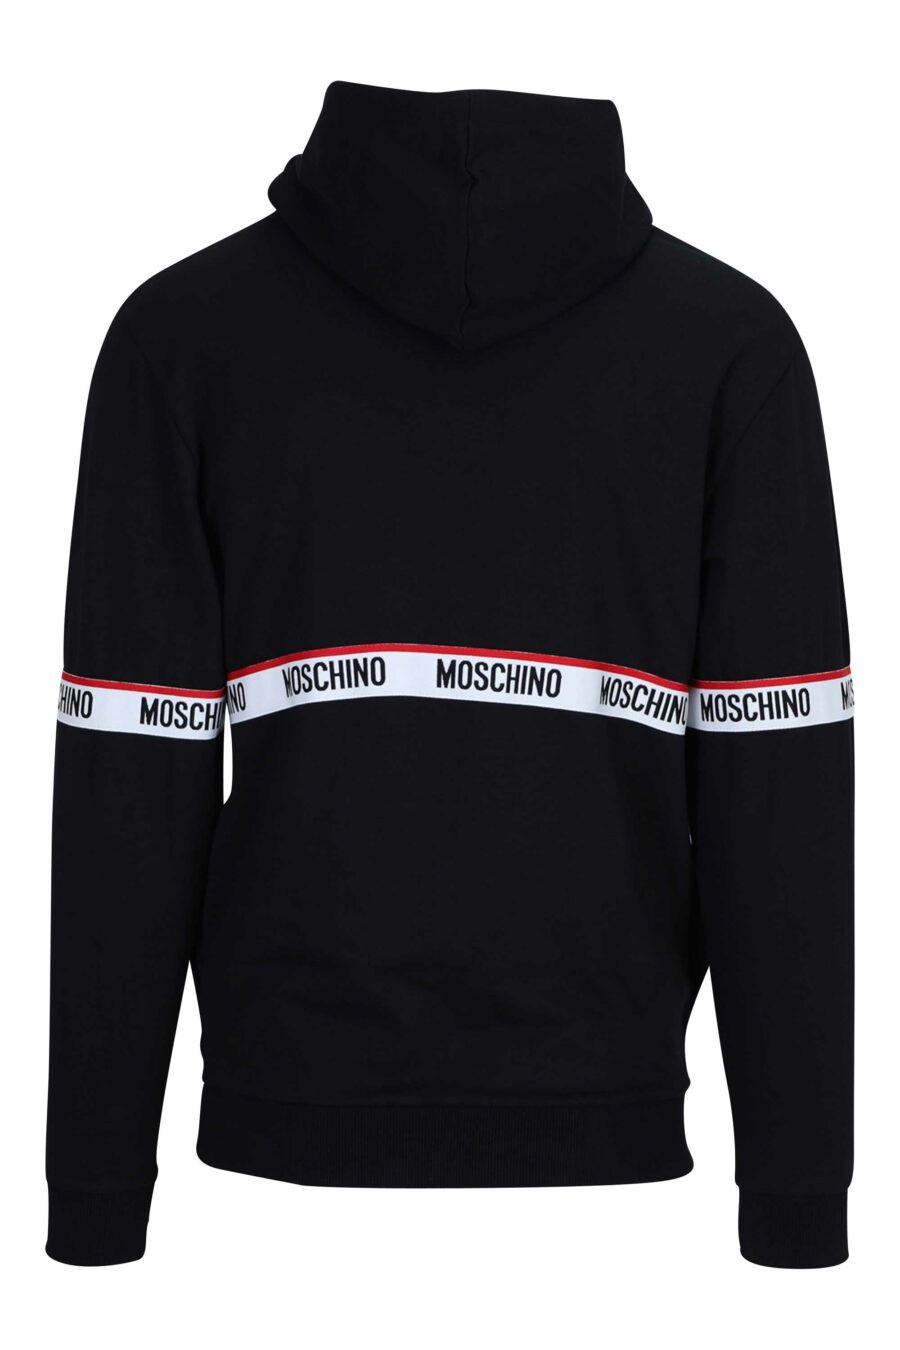 Black sweatshirt with hood and logo on central ribbon - 667113012506 1